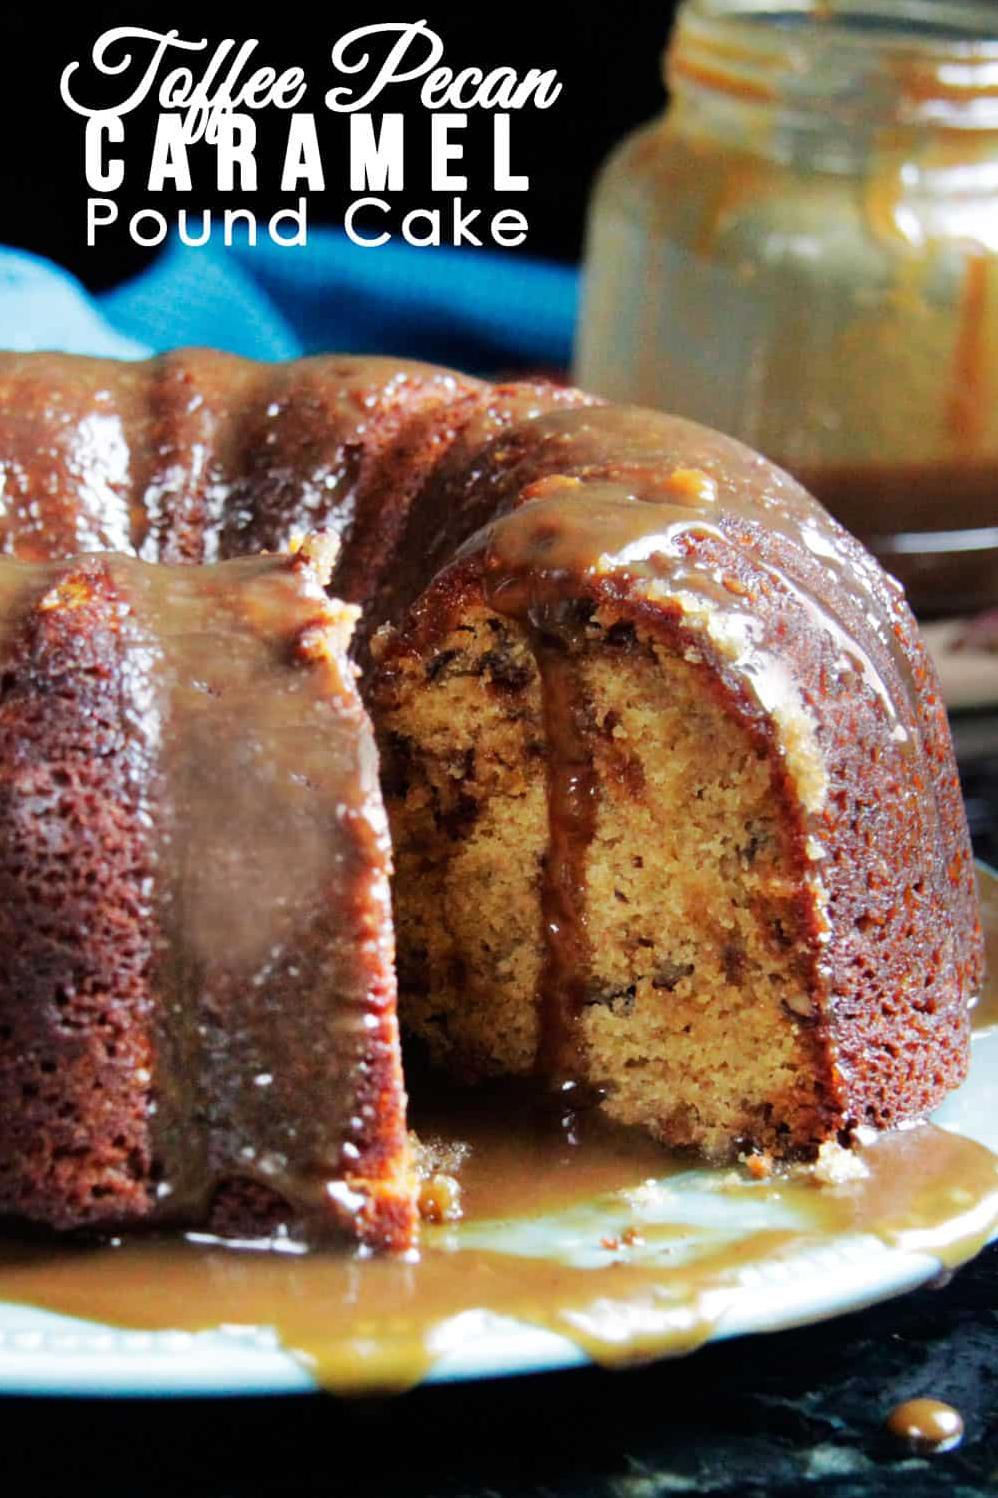  Here's your answer to the perfect afternoon tea treat: caramel pound cake - absolutely irresistible!